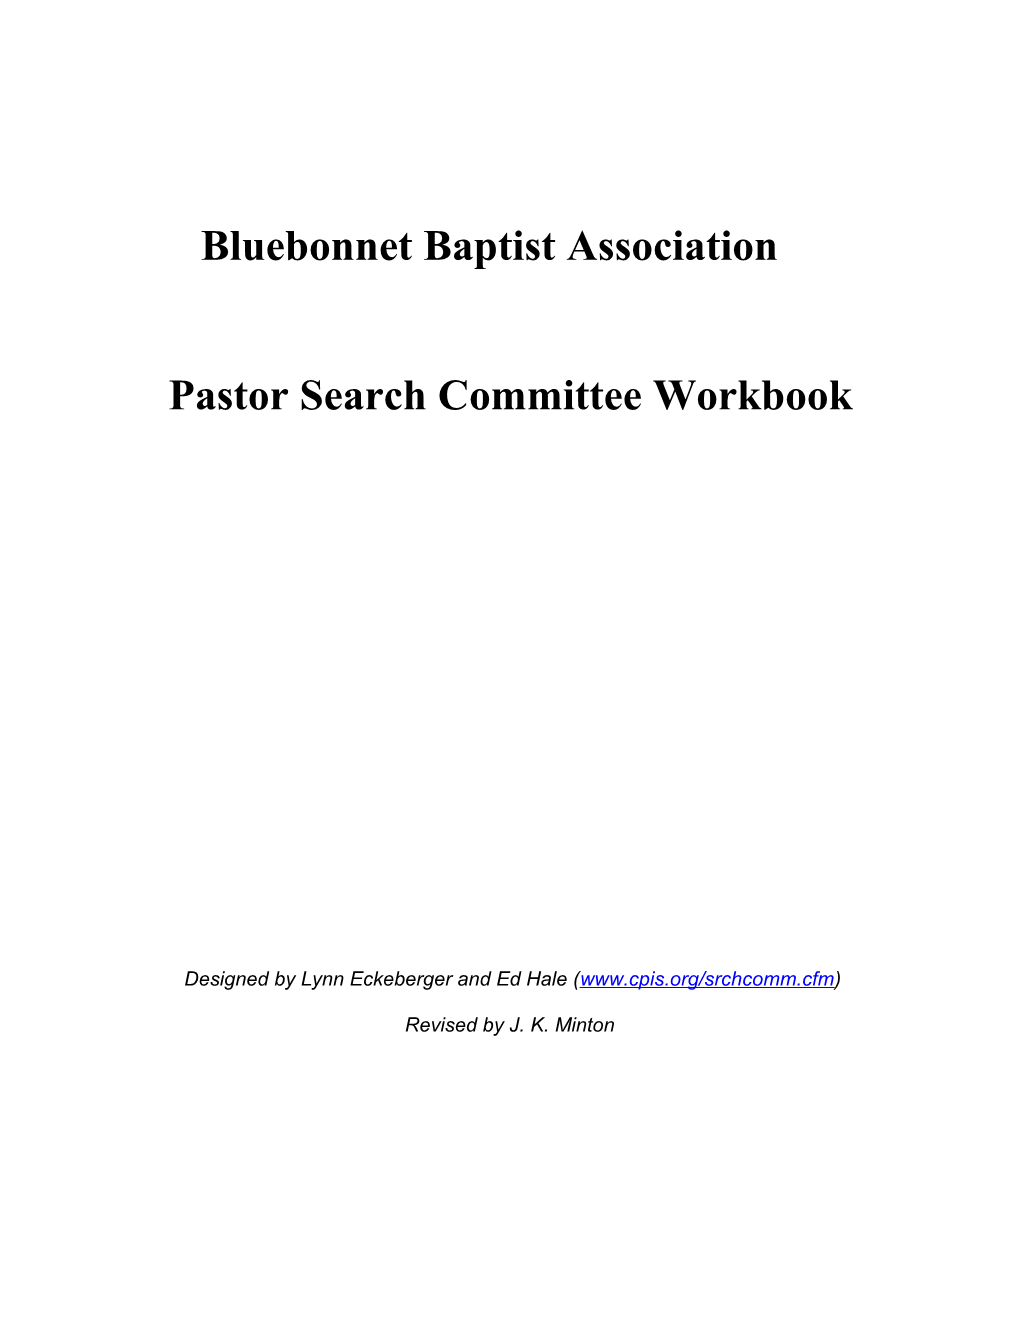 Pastor Search Committee Workbook